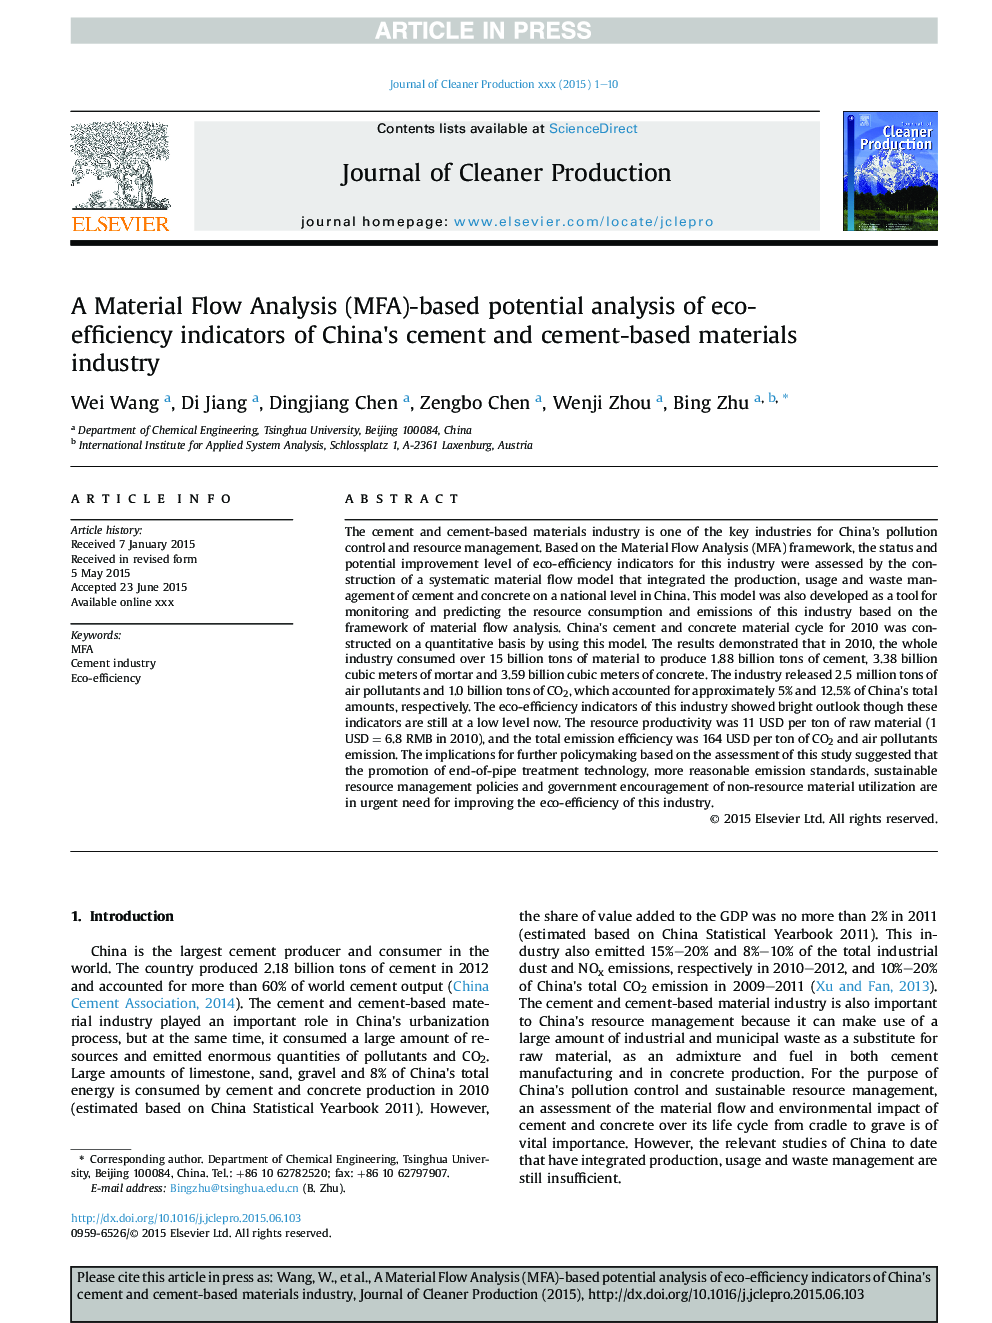 A Material Flow Analysis (MFA)-based potential analysis of eco-efficiency indicators of China's cement and cement-based materials industry